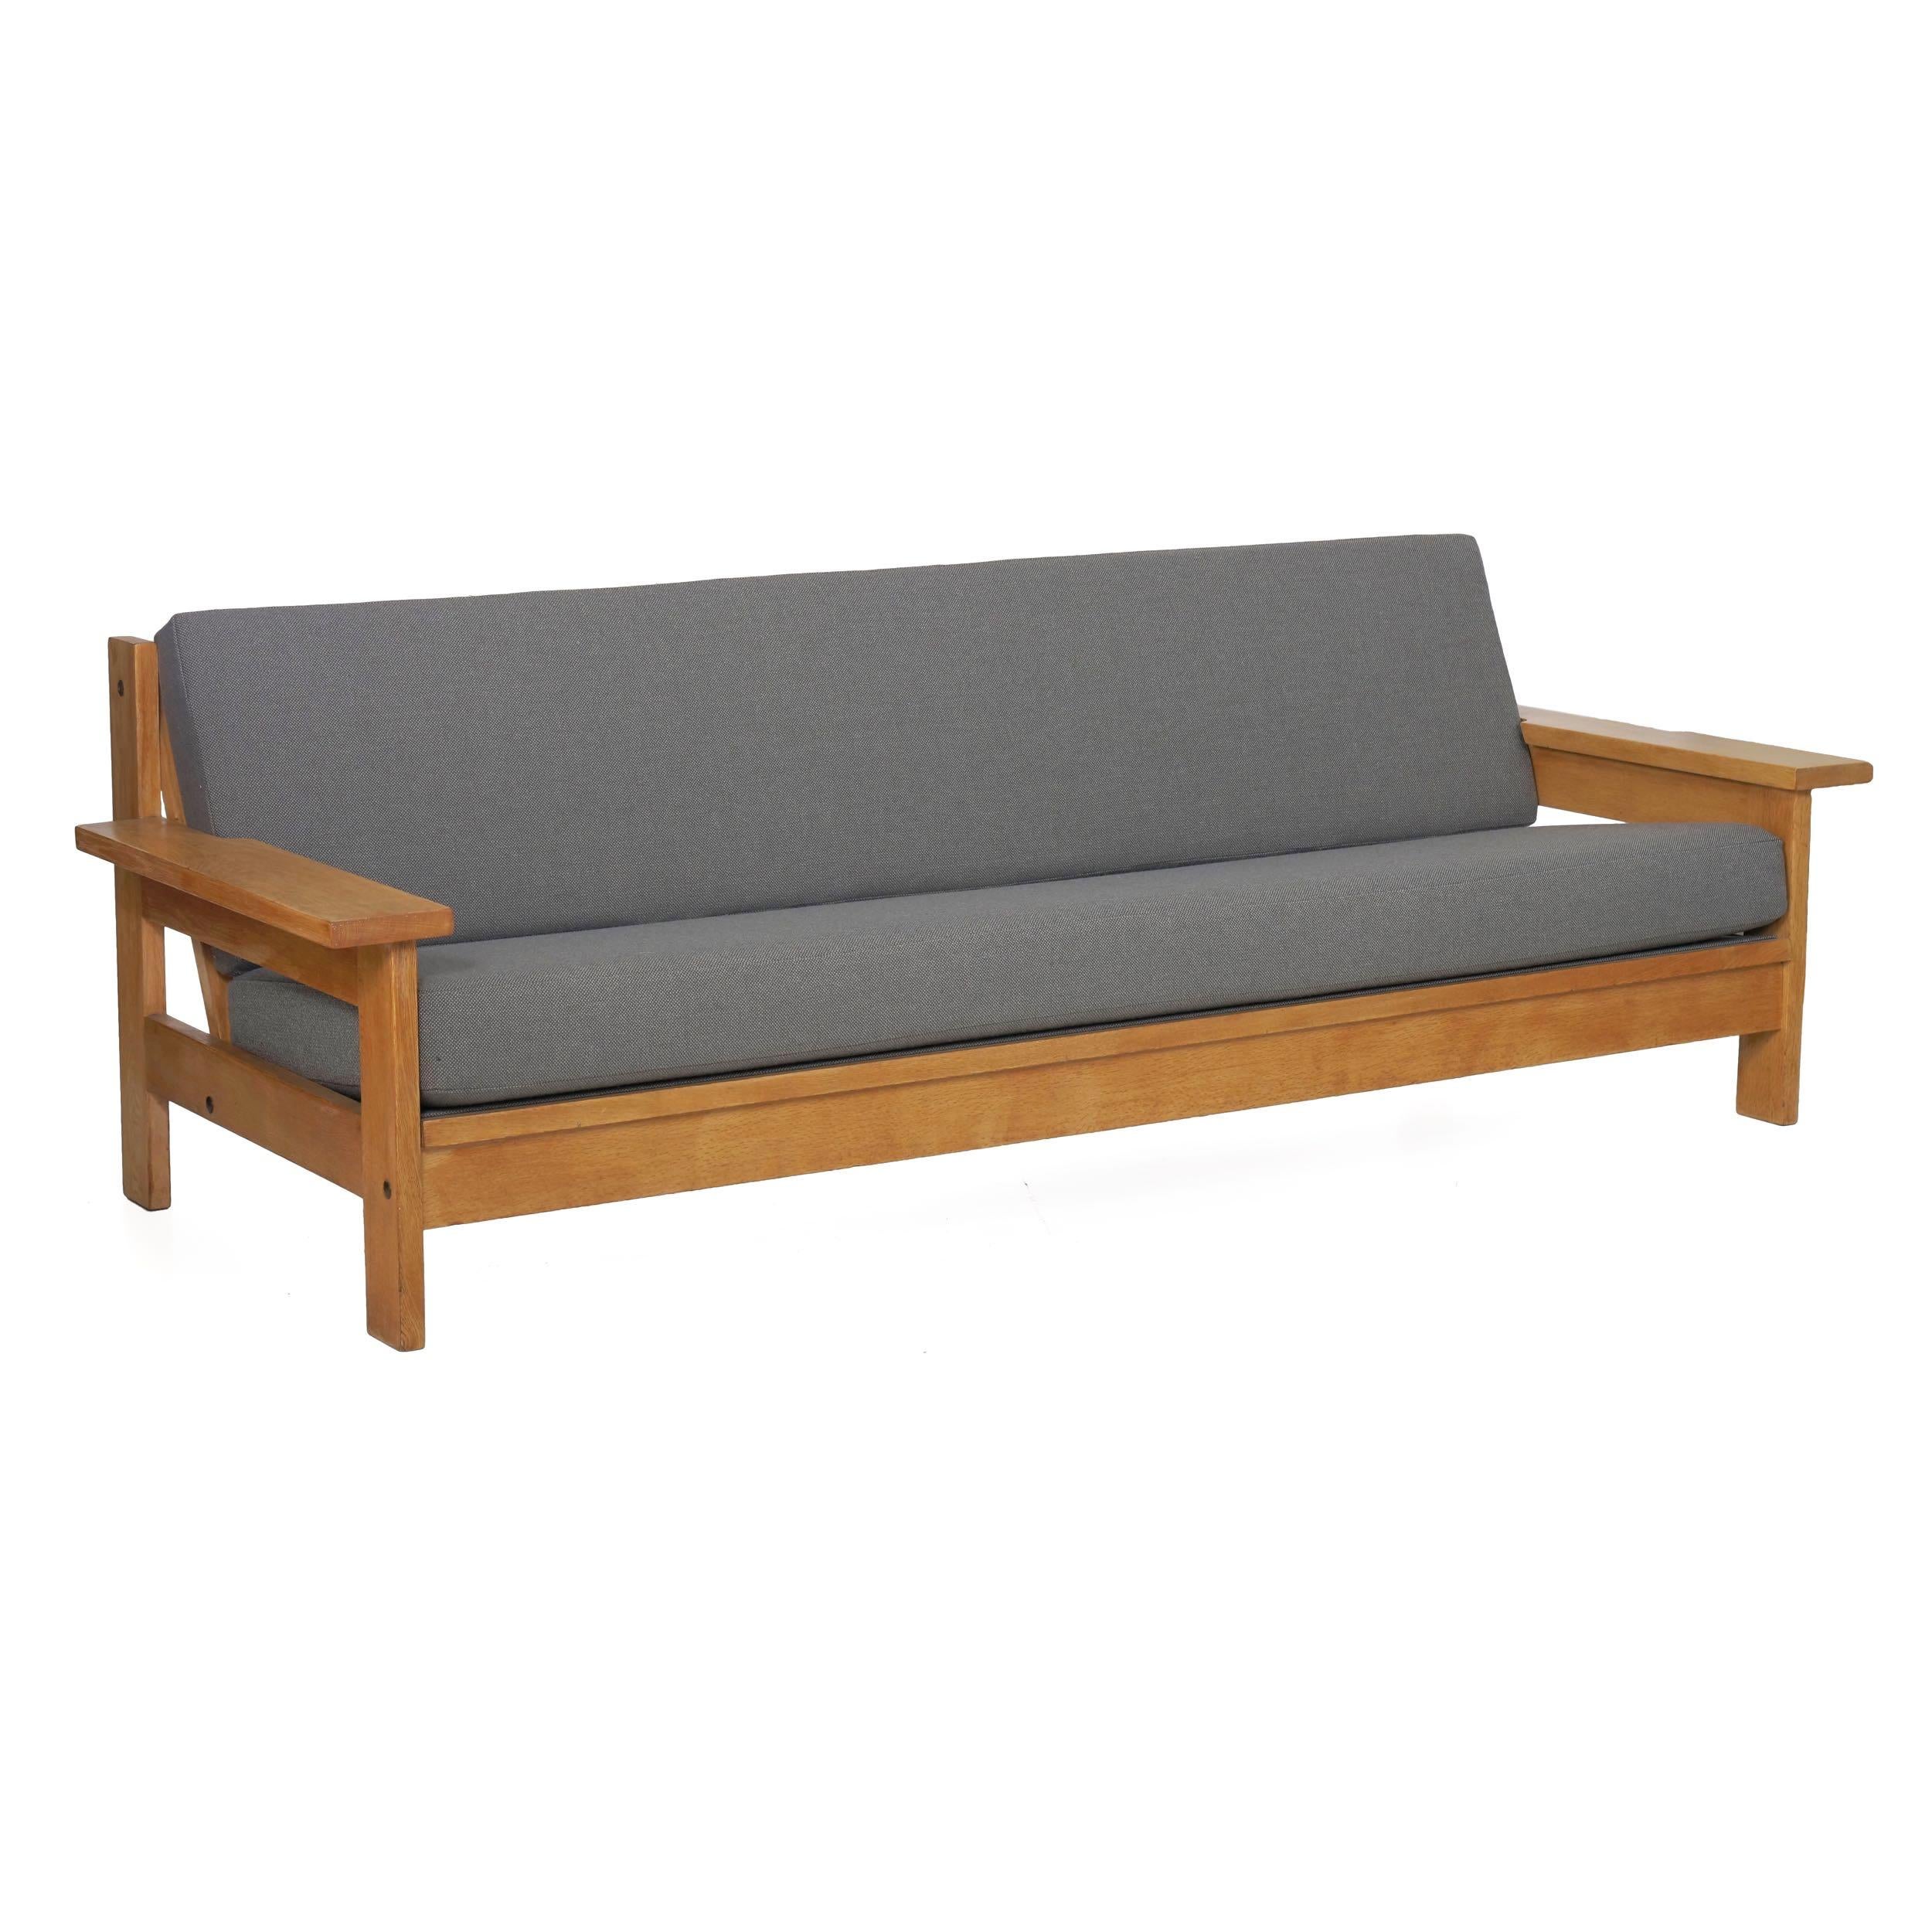 A sleek and angular three-seat sofa of excellent quality, this piece is executed in solid white oak that has a lovely faded and mellowed appeal in the natural open grain. Stark simplicity rules the form, which is somewhat reminiscent of a modernized